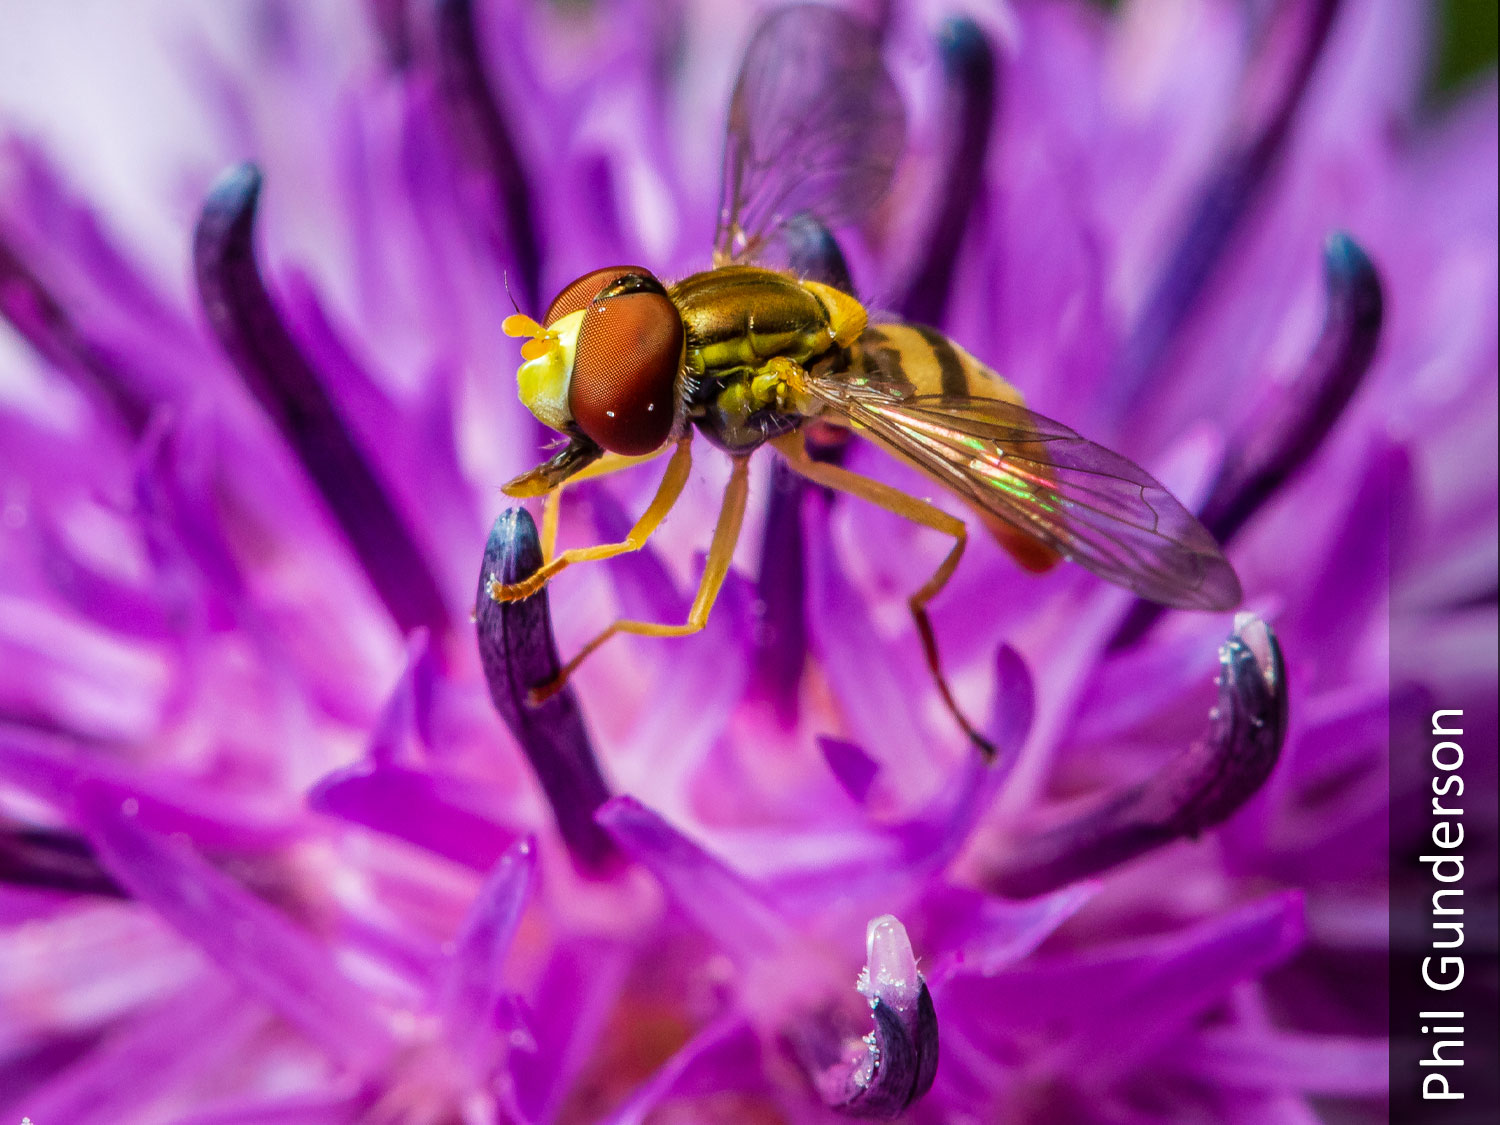 American hoverfly